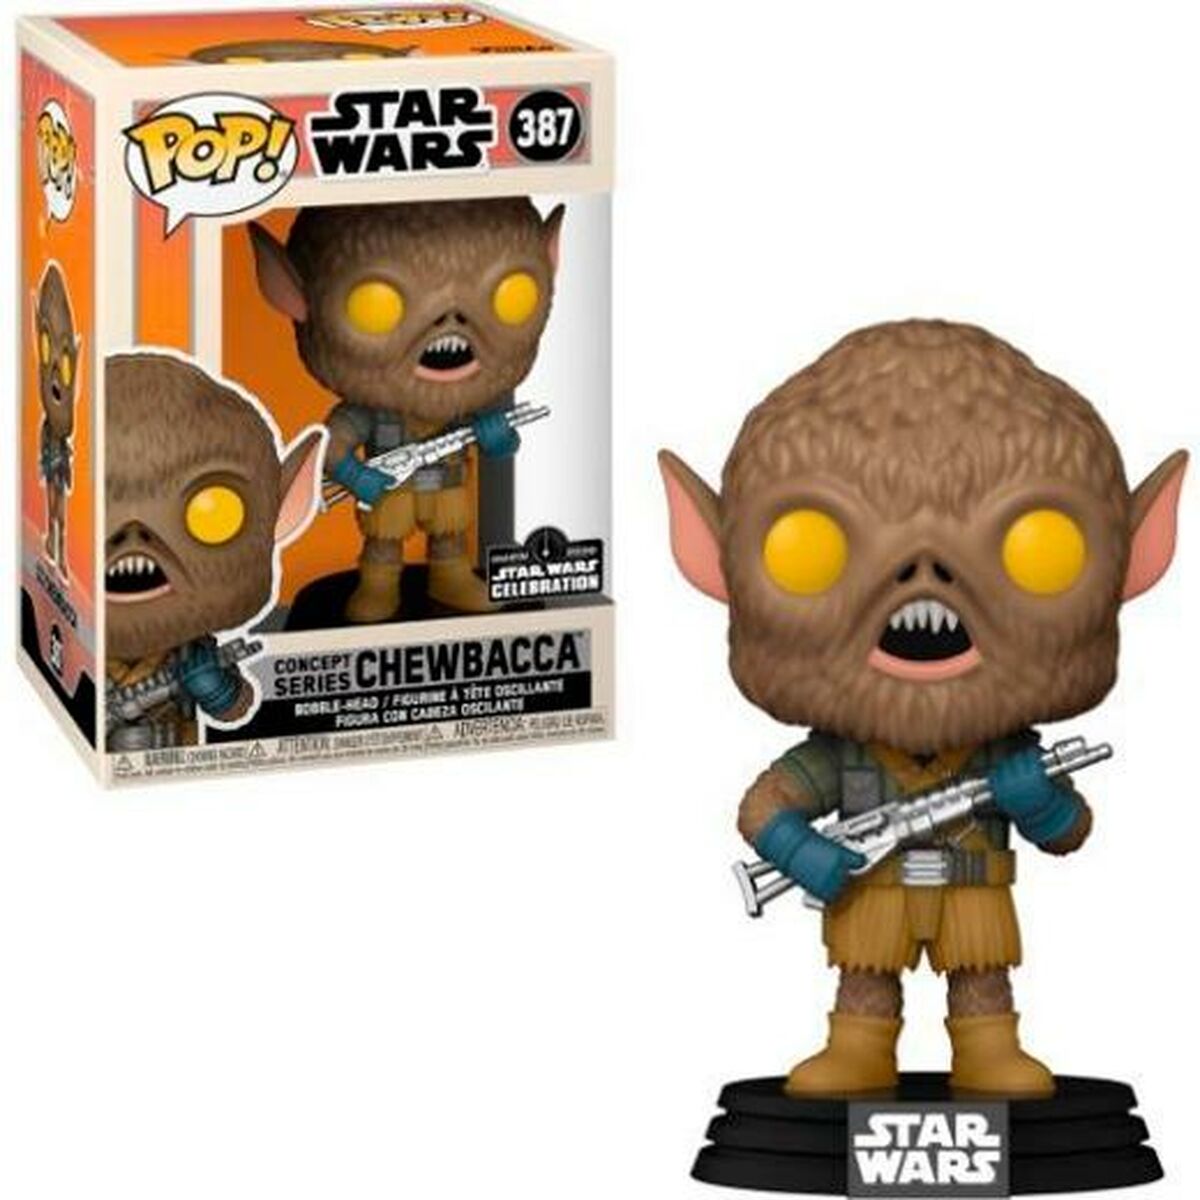 Figurine d’action Funko POP STAR WARS CONCEPT CHEWBACCA SERIES EXCLUSIVE Nº 387